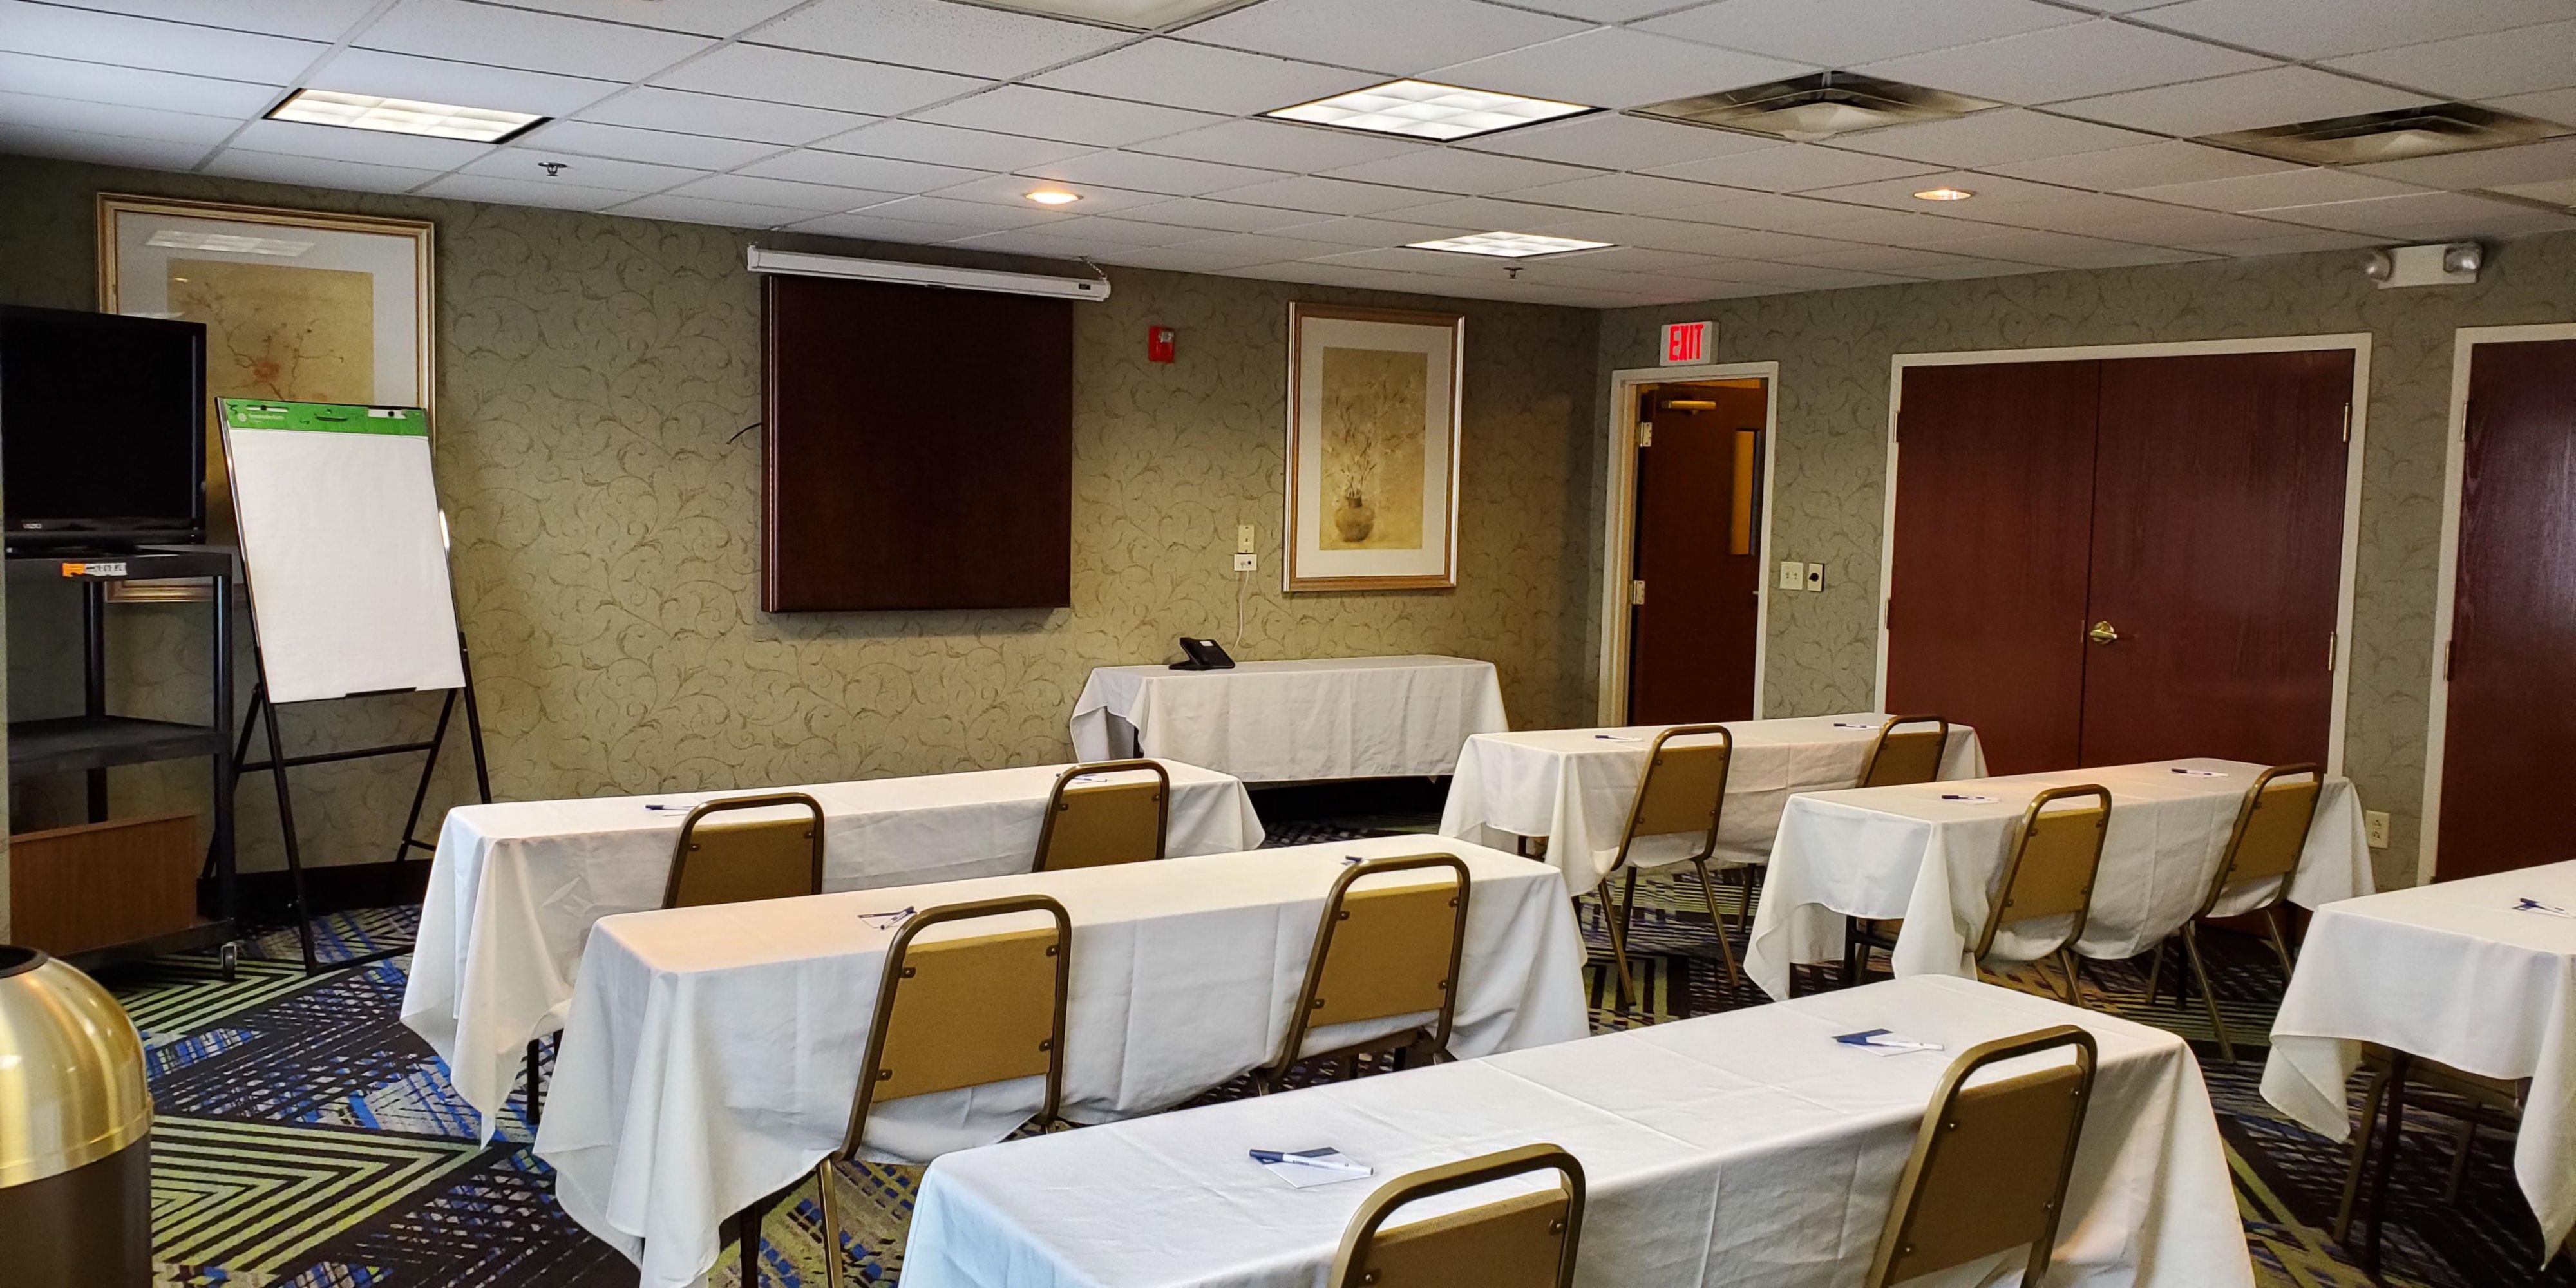 We are please to offer meeting space to accommodate boardroom or larger general sessions. Contact the hotel team today to reserve today!